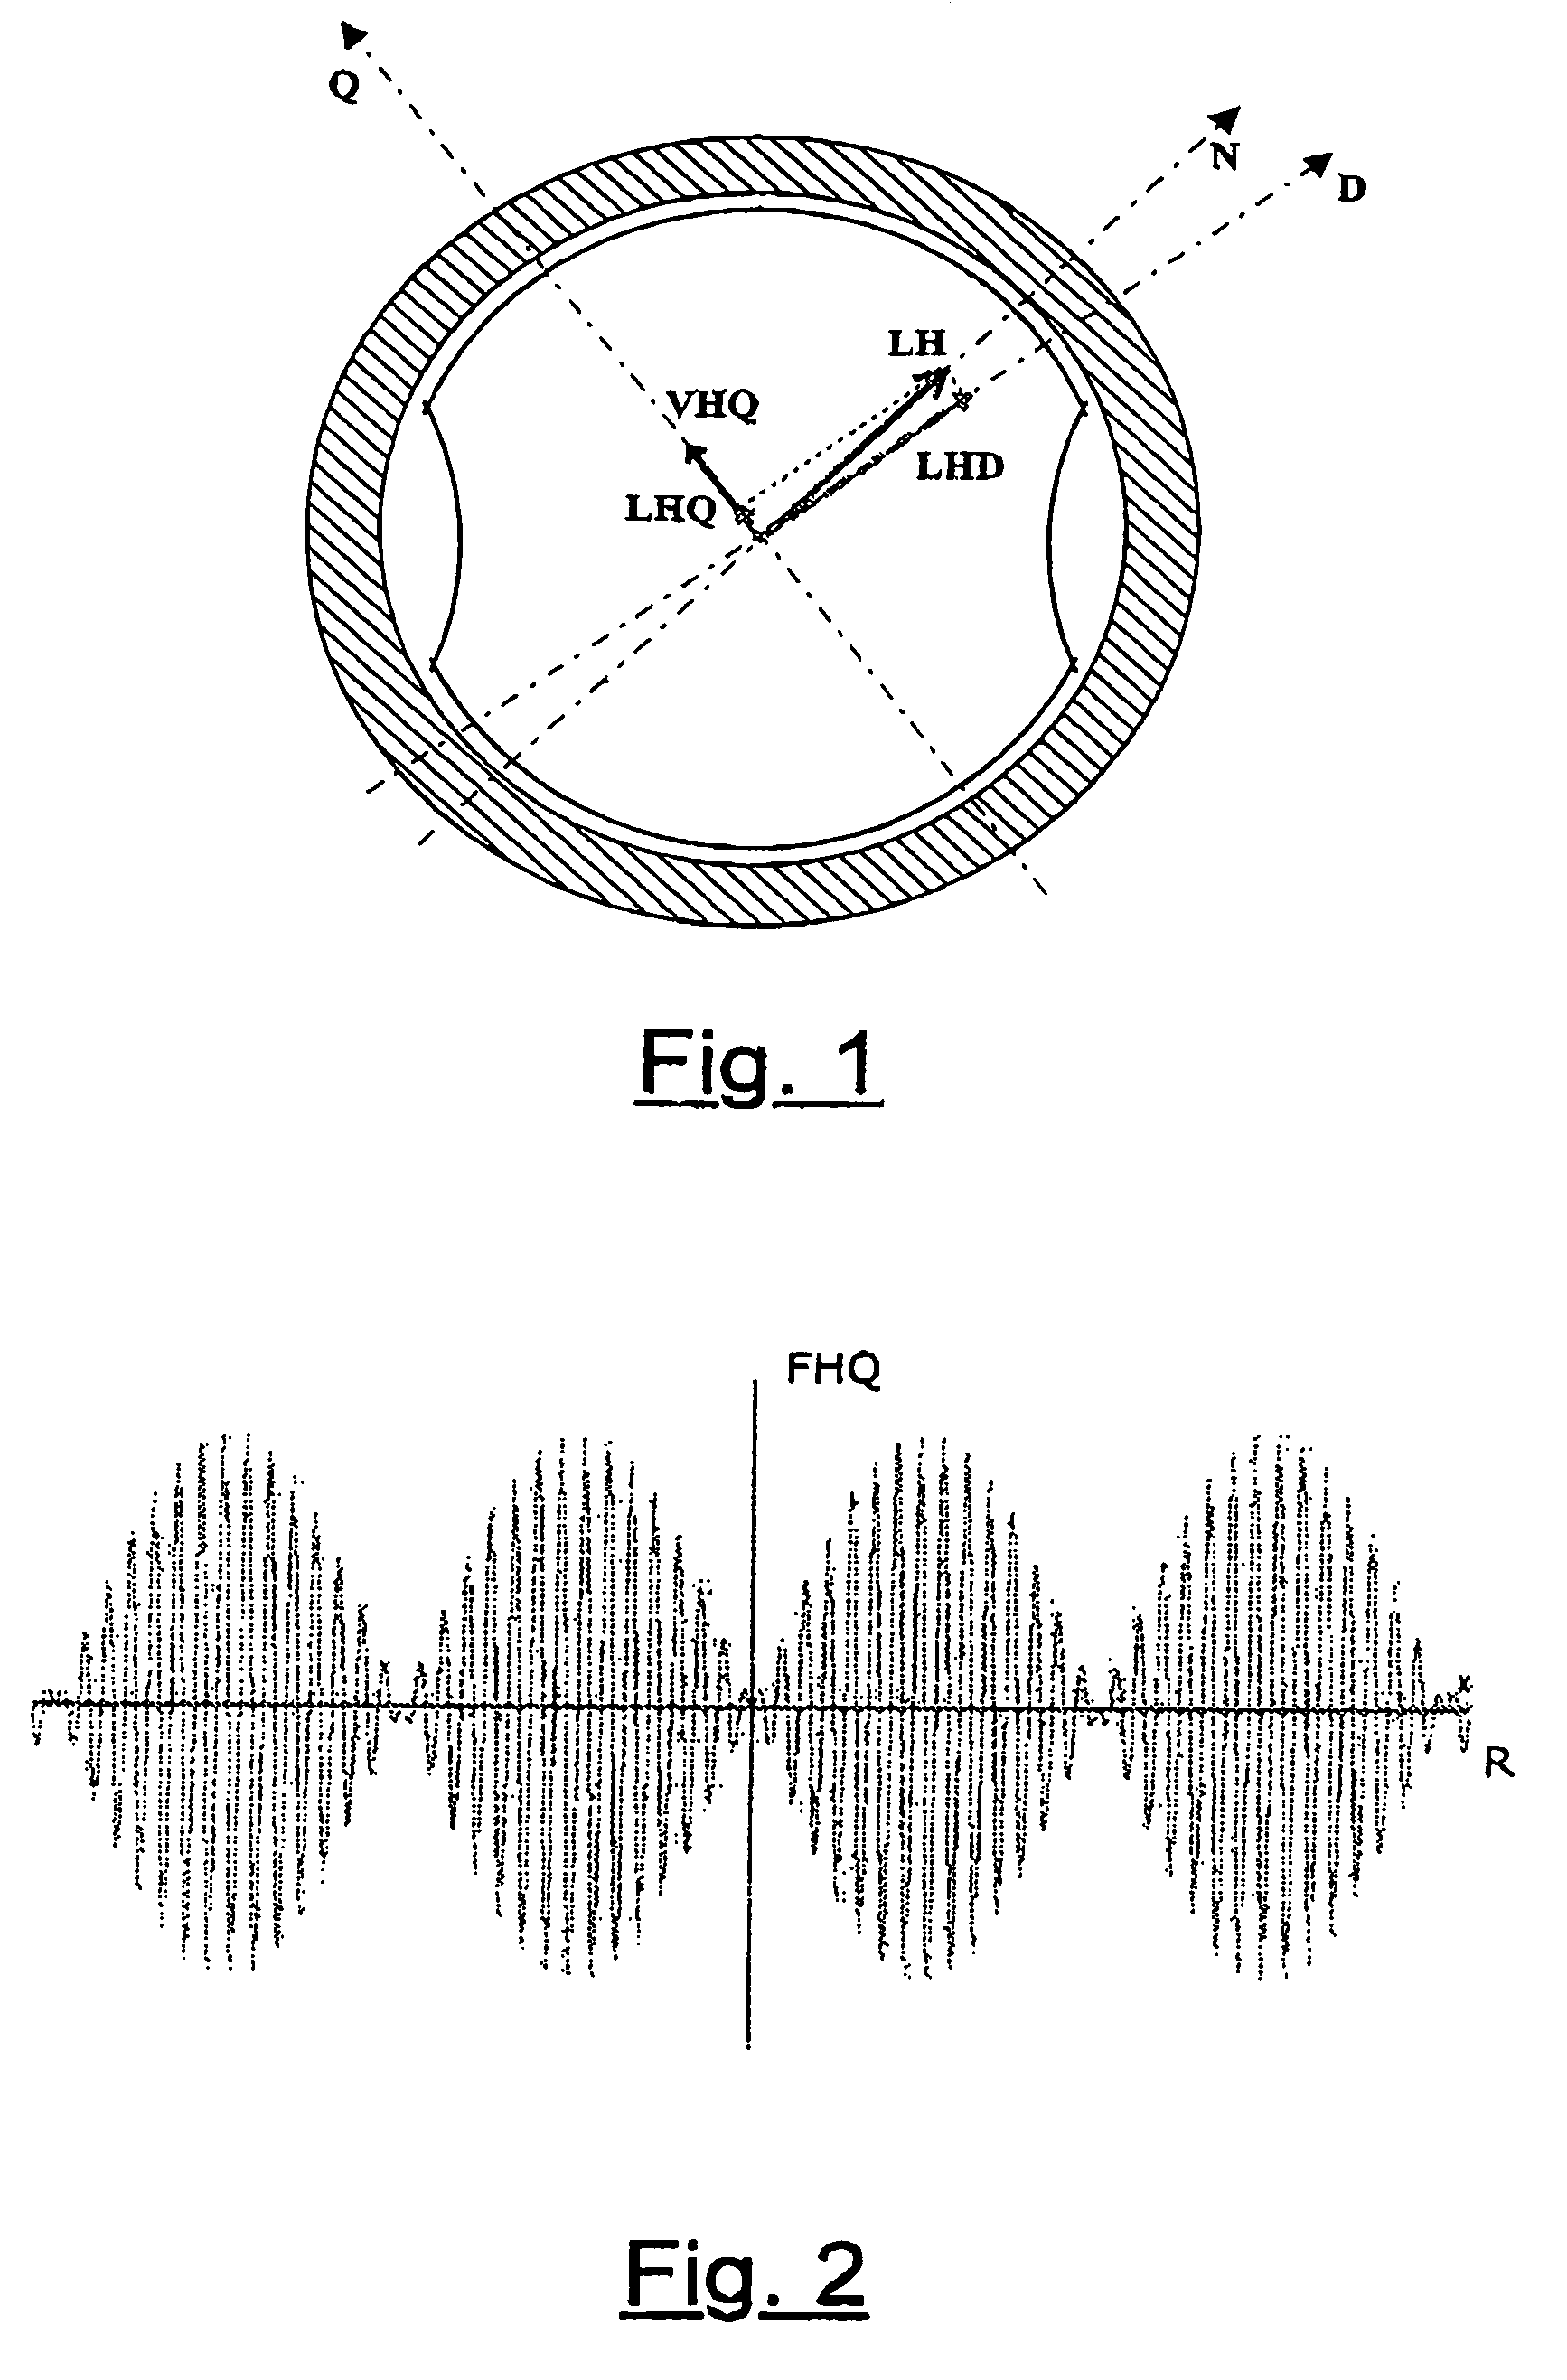 Control system and method for electric drives with a.c. motors